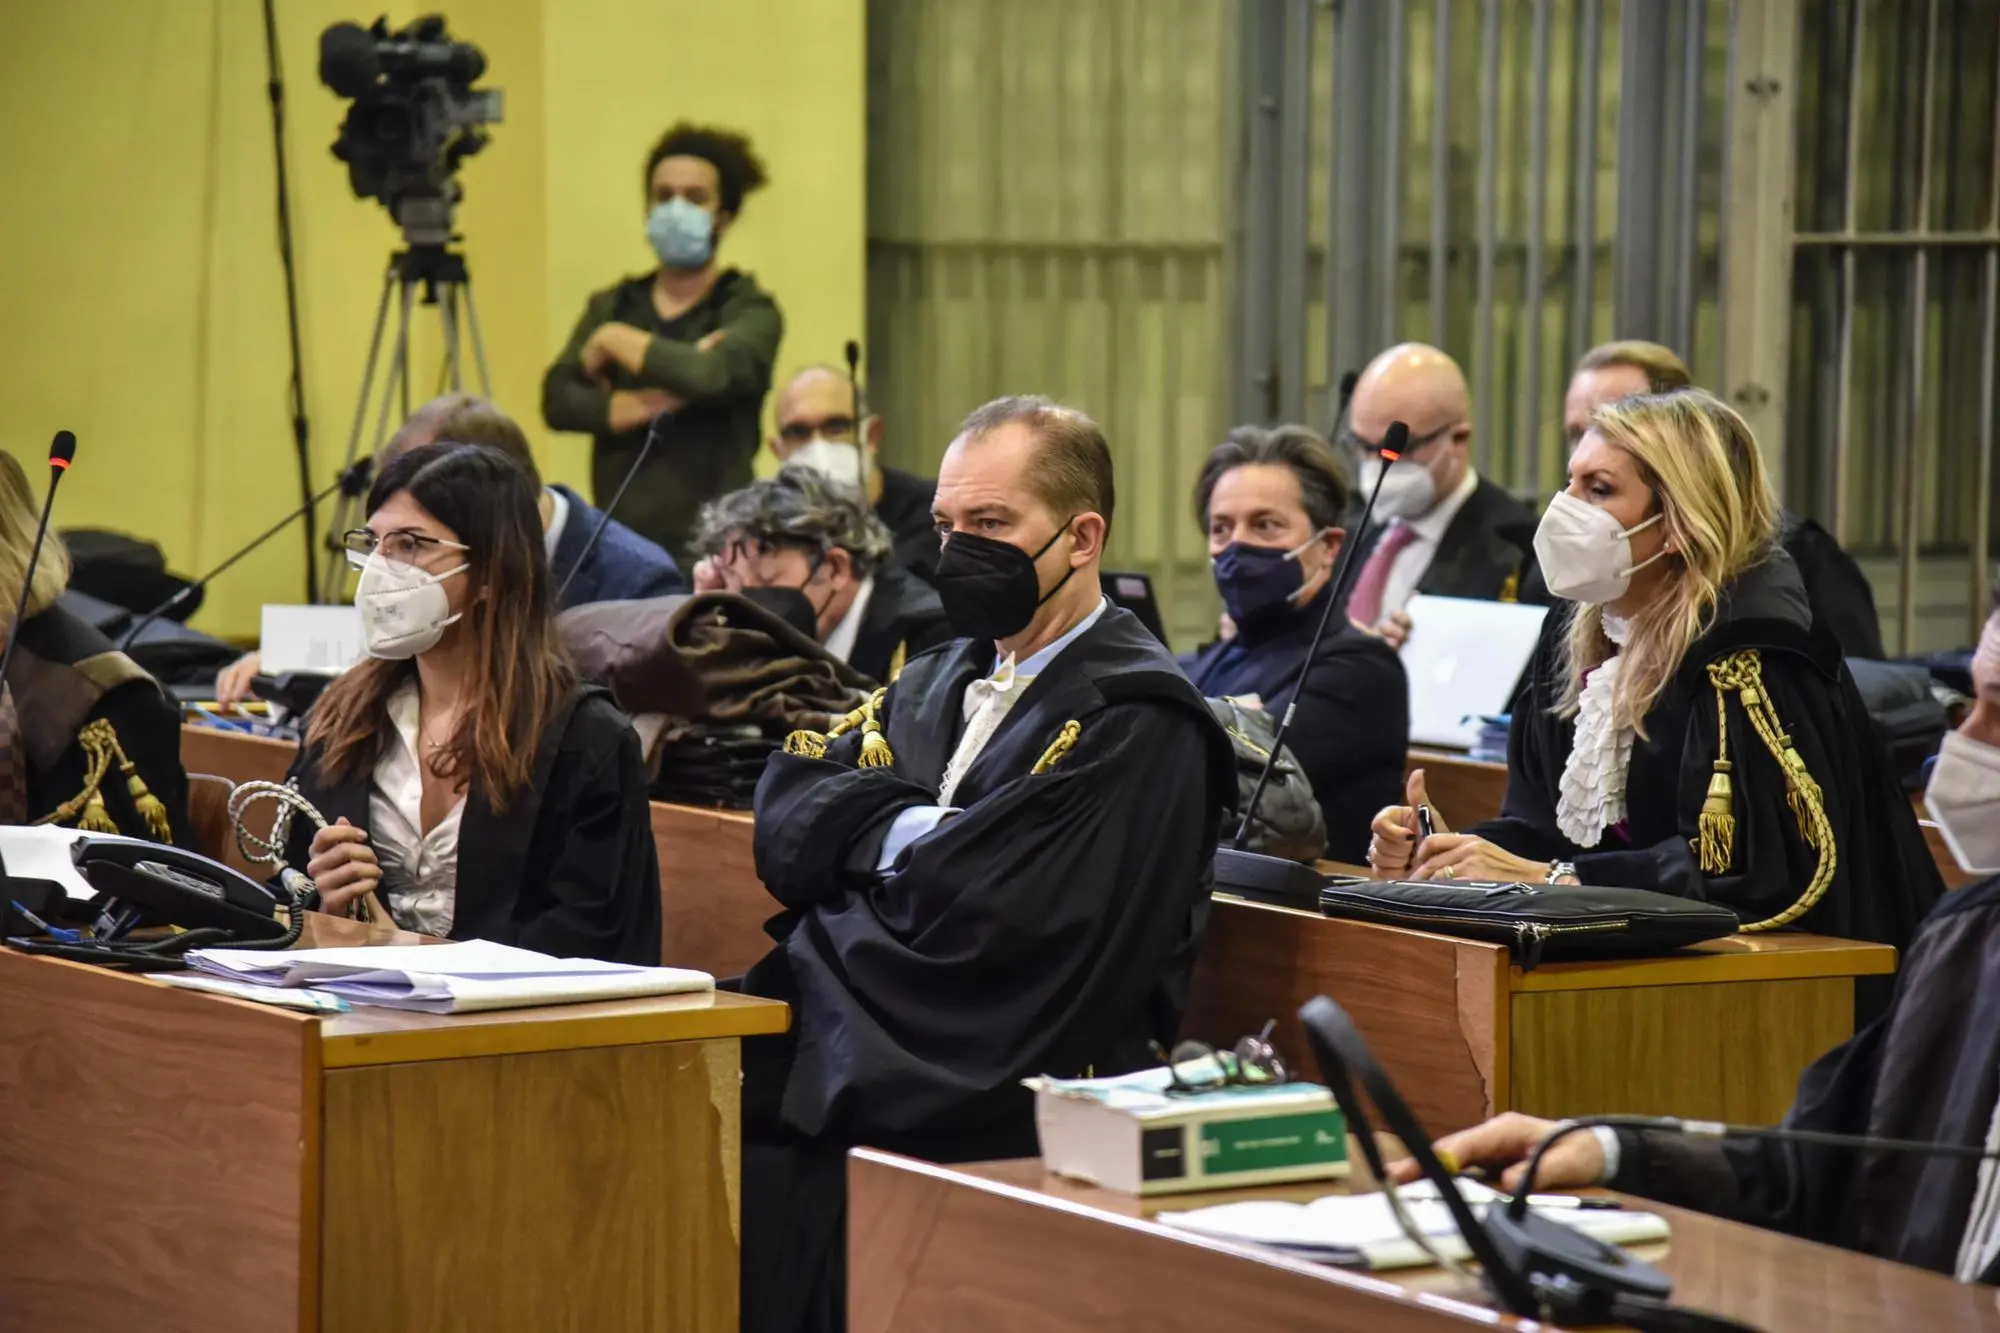 The lawyer Cecconi in the courtroom (Ansa)